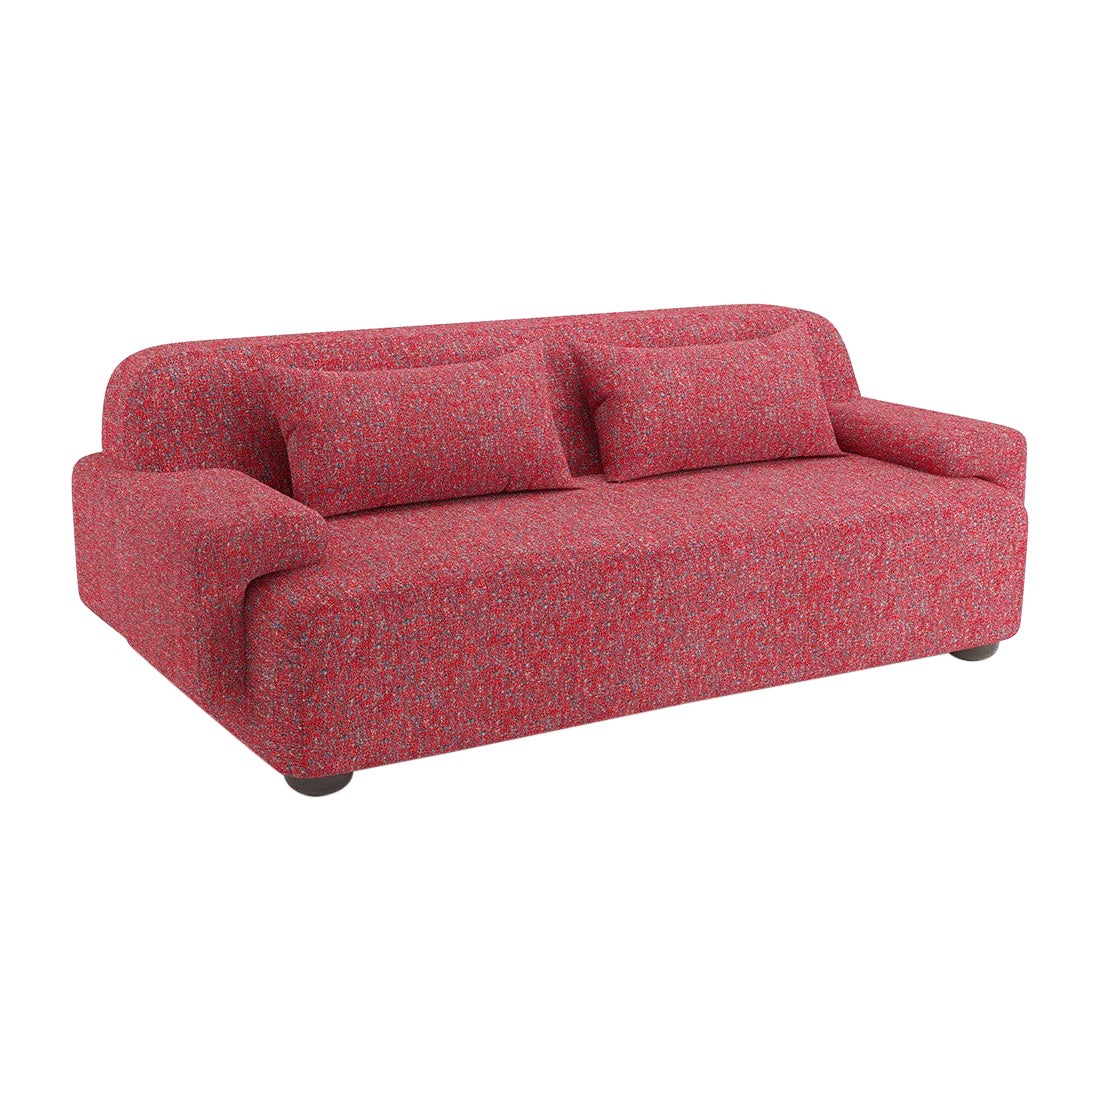 Popus Editions Lena 2.5 Seater Sofa in Cayenne Zanzi Linen & Wool Blend Fabric For Sale